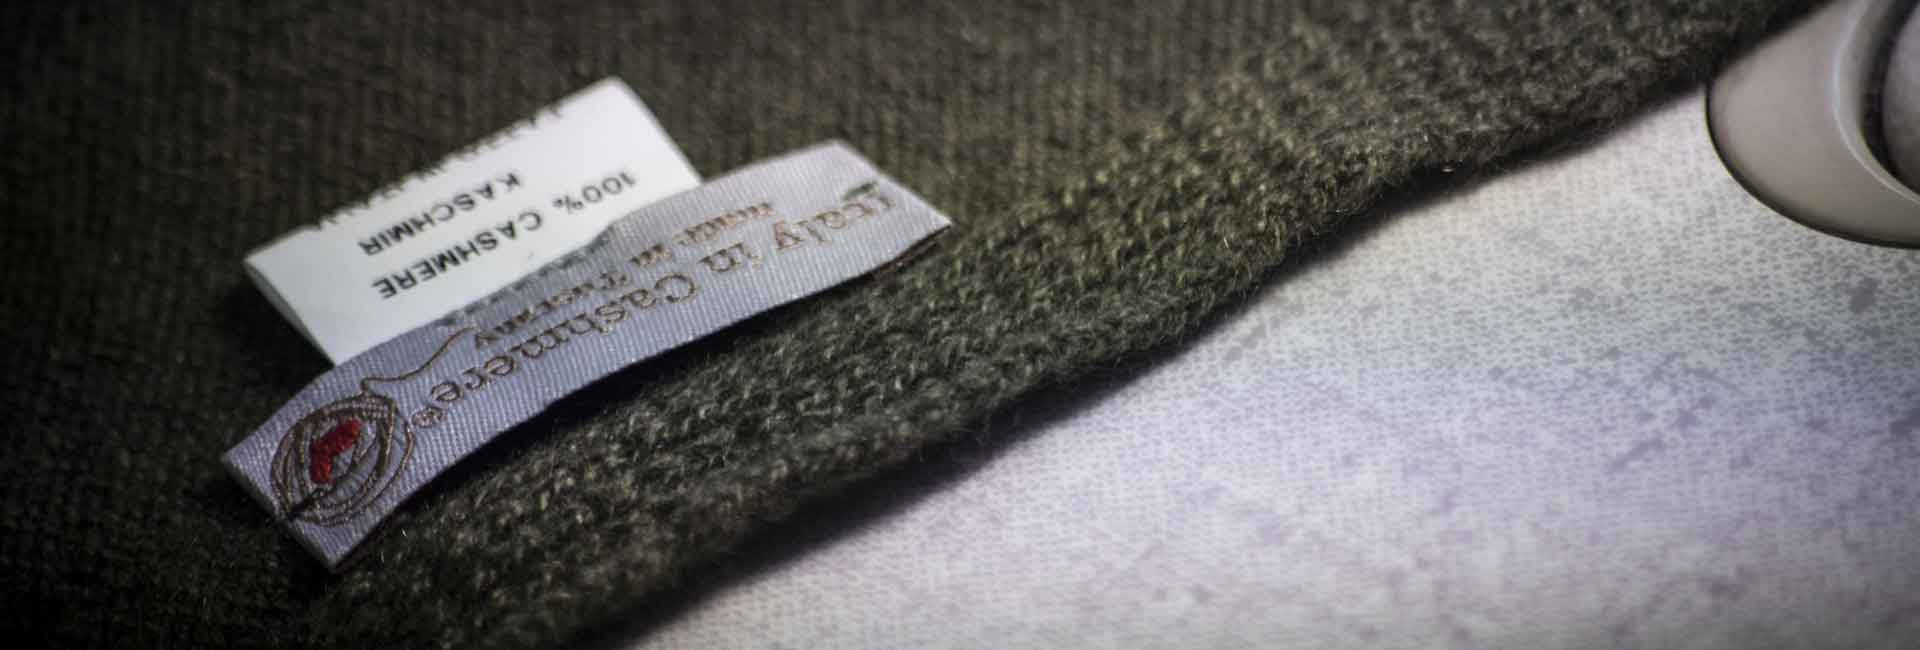 Italy in Cashmere pure cashmere wrap detail with label